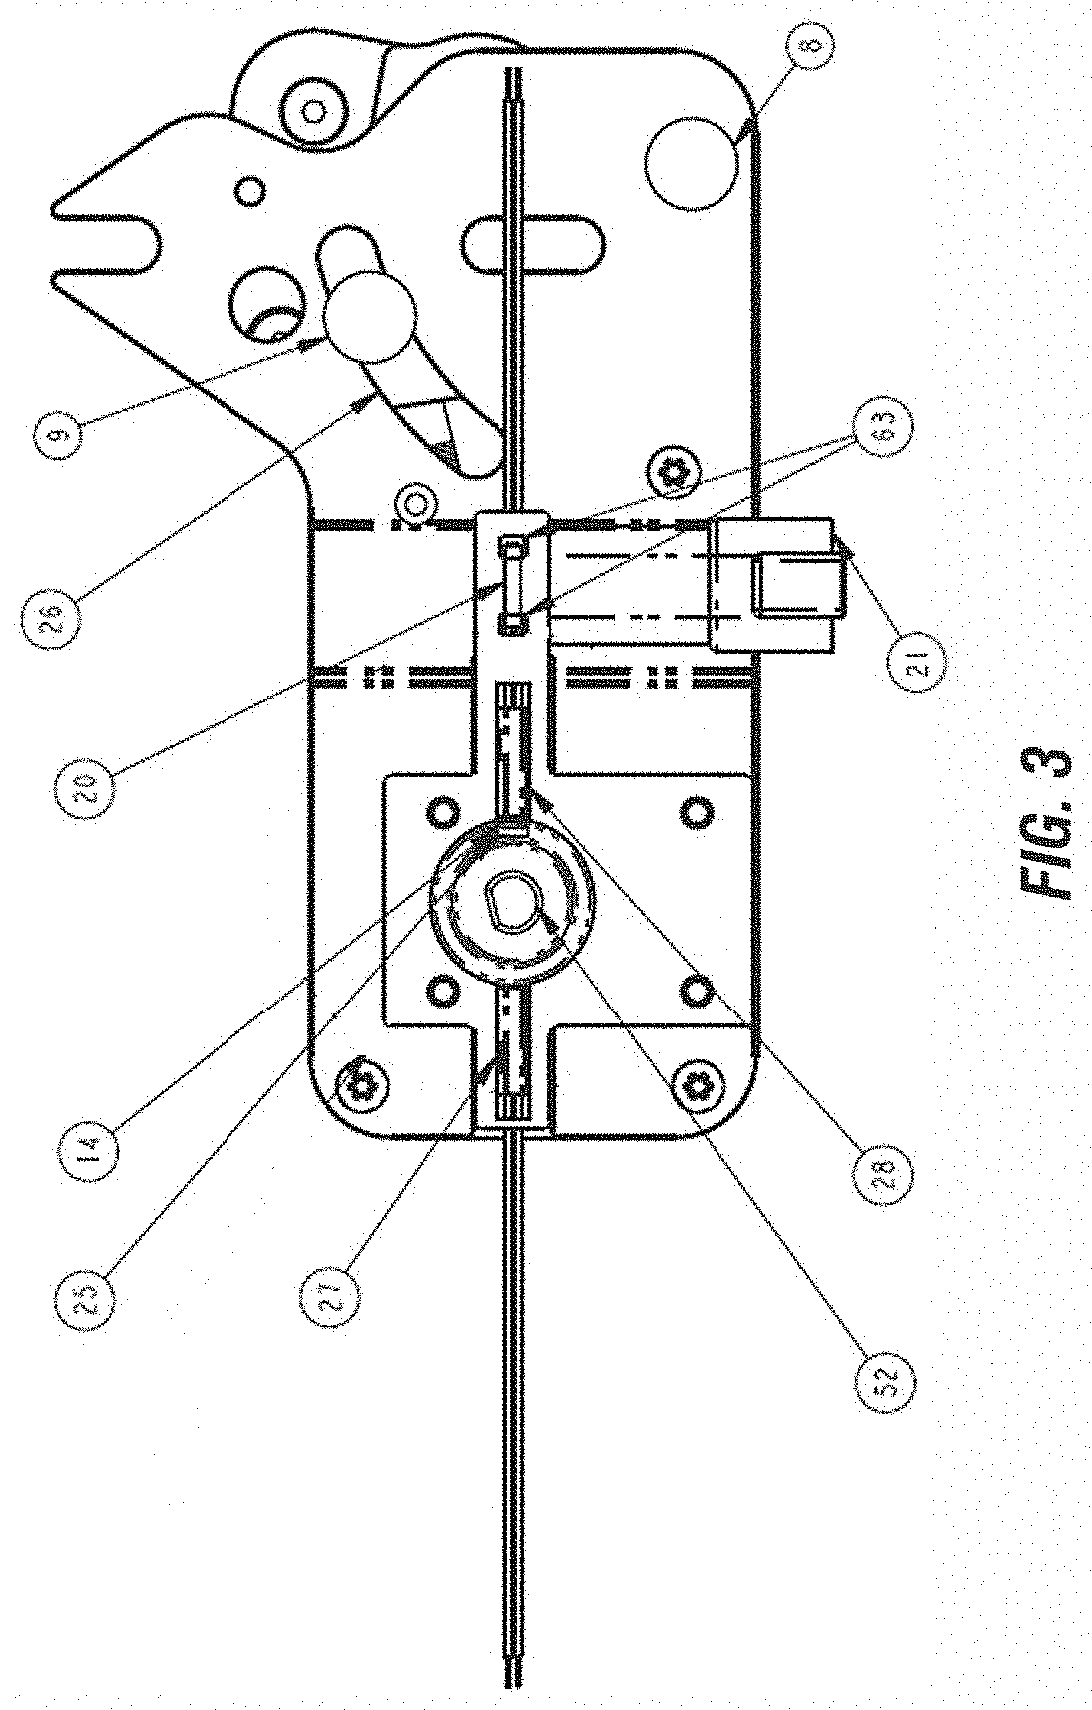 Motor control for powered closure with Anti-pinch